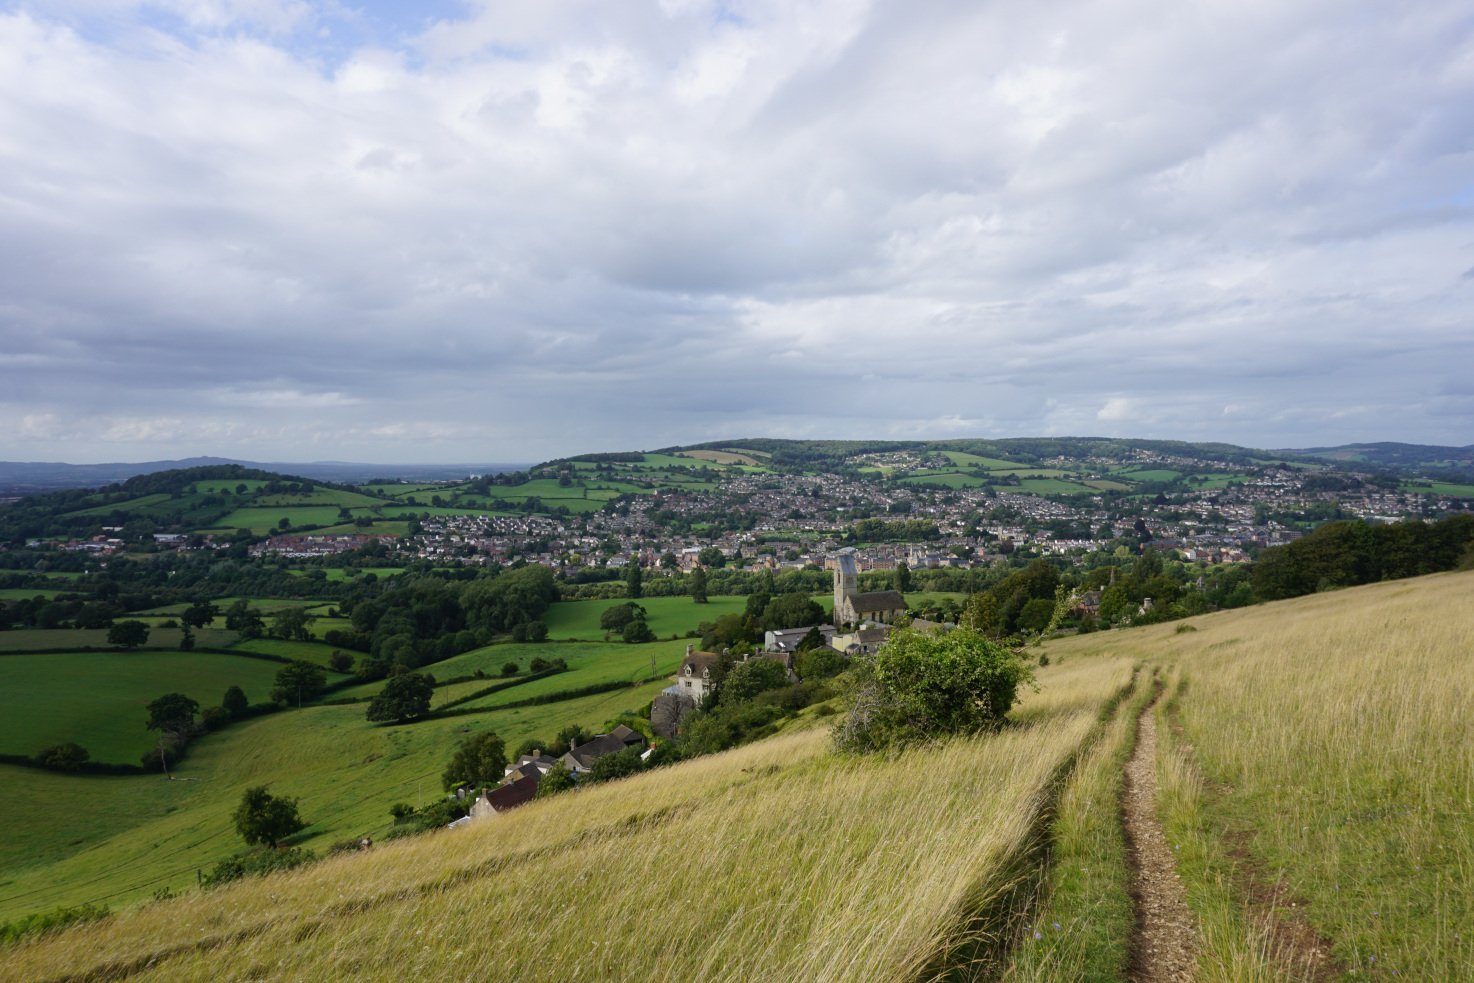 Great views of the Stroud valley while walking along the Cotswold Way in Selsley Common